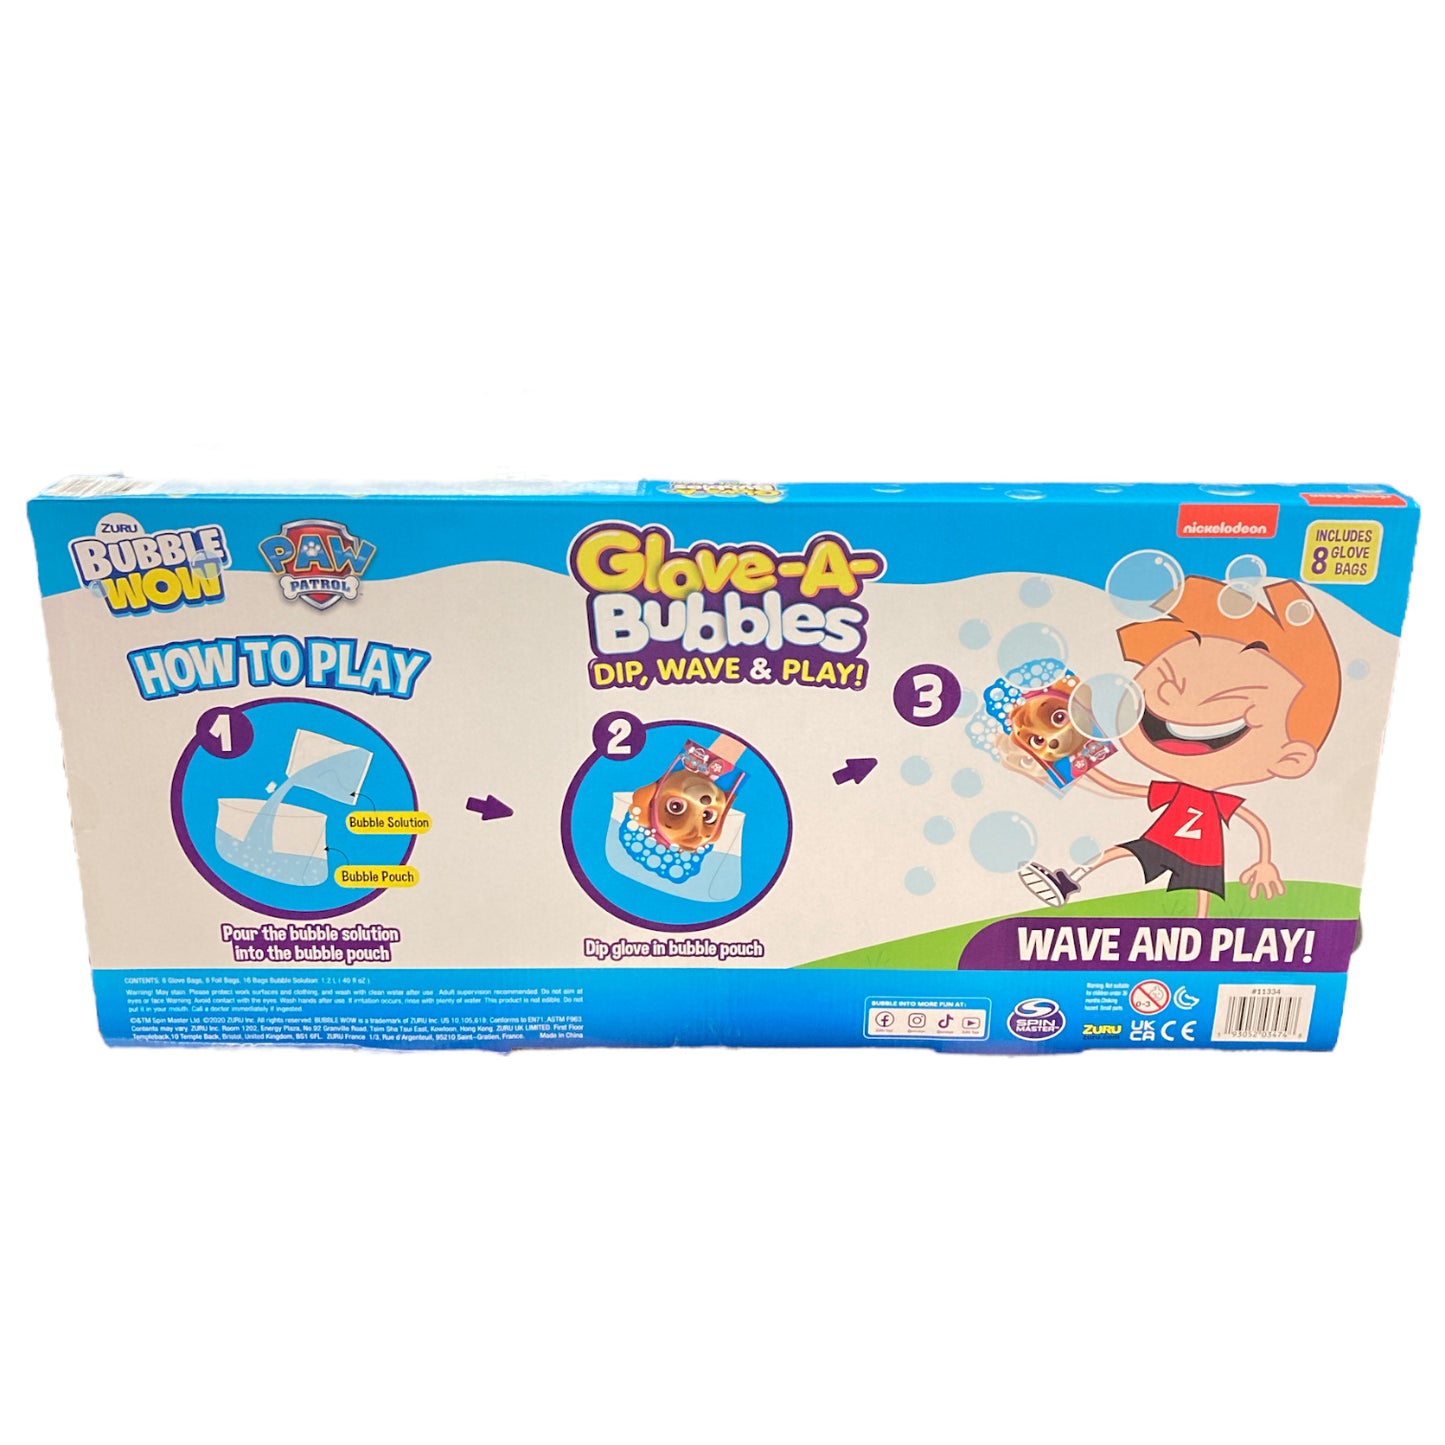 Bubble Wow Paw Patrol Glove-A-Bubbles Wave & Play (8 Pack)